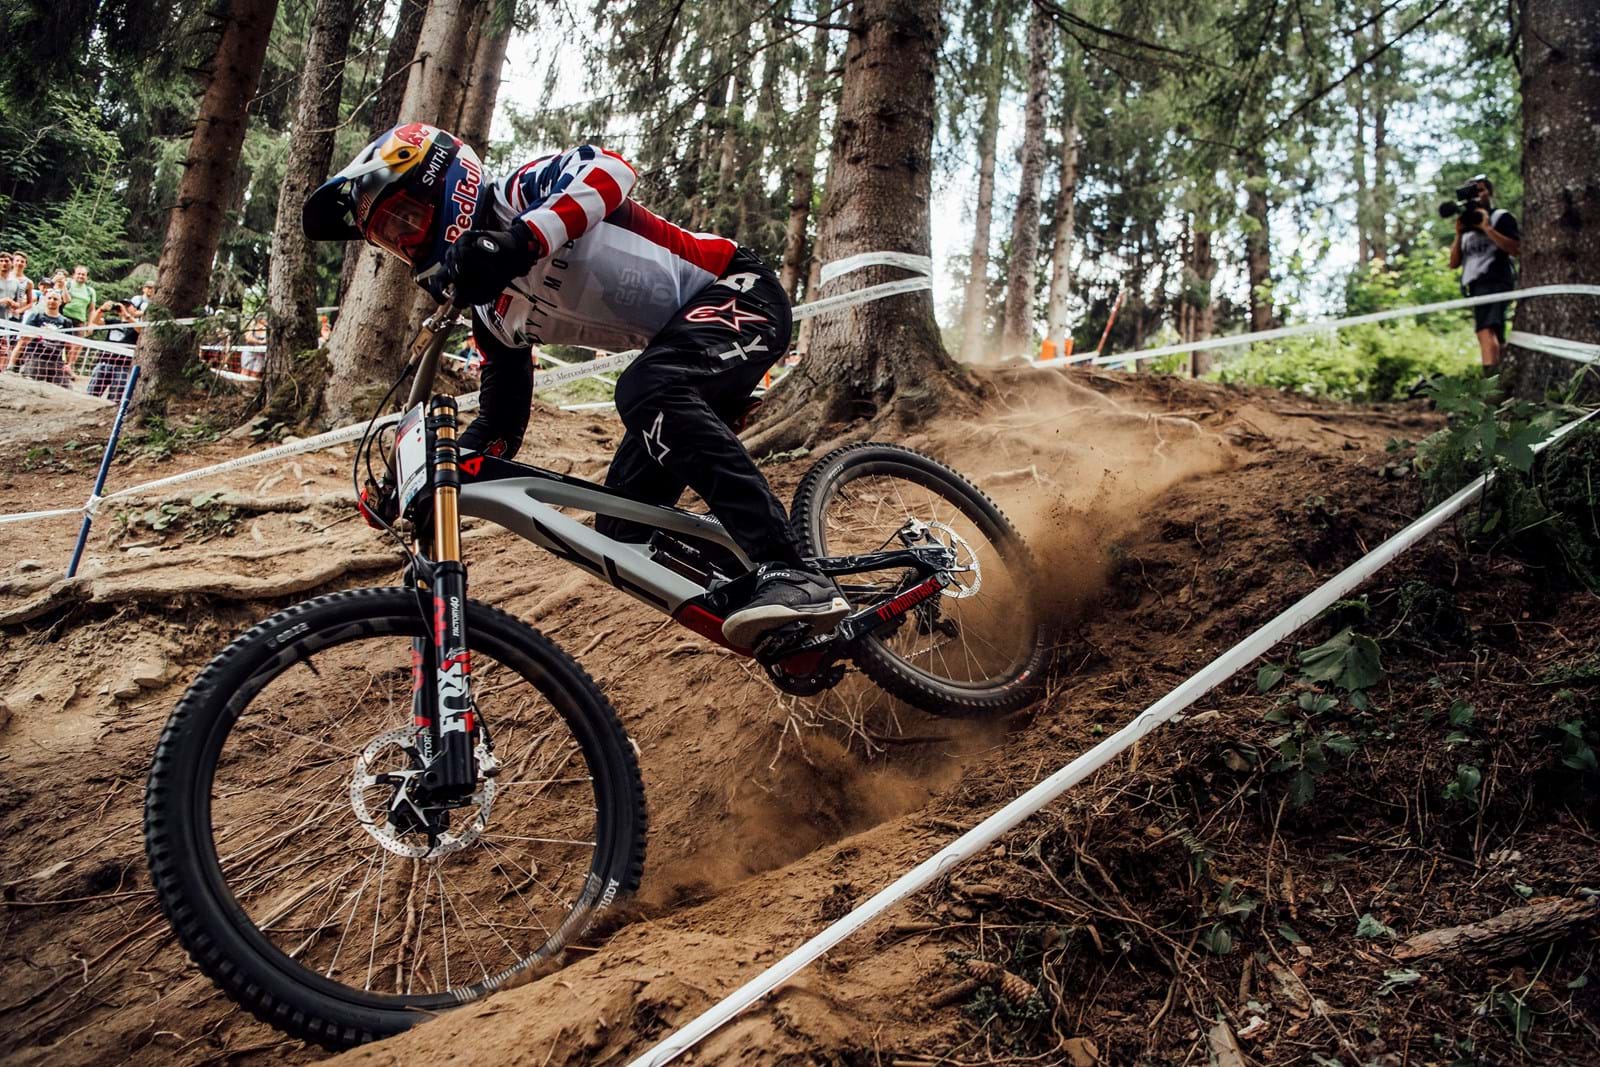 SUNSET+VINE PARTNERS WITH RED BULL MEDIA HOUSE FOR MERCEDES BENZ UCI MOUNTAIN BIKE WORLD CUP